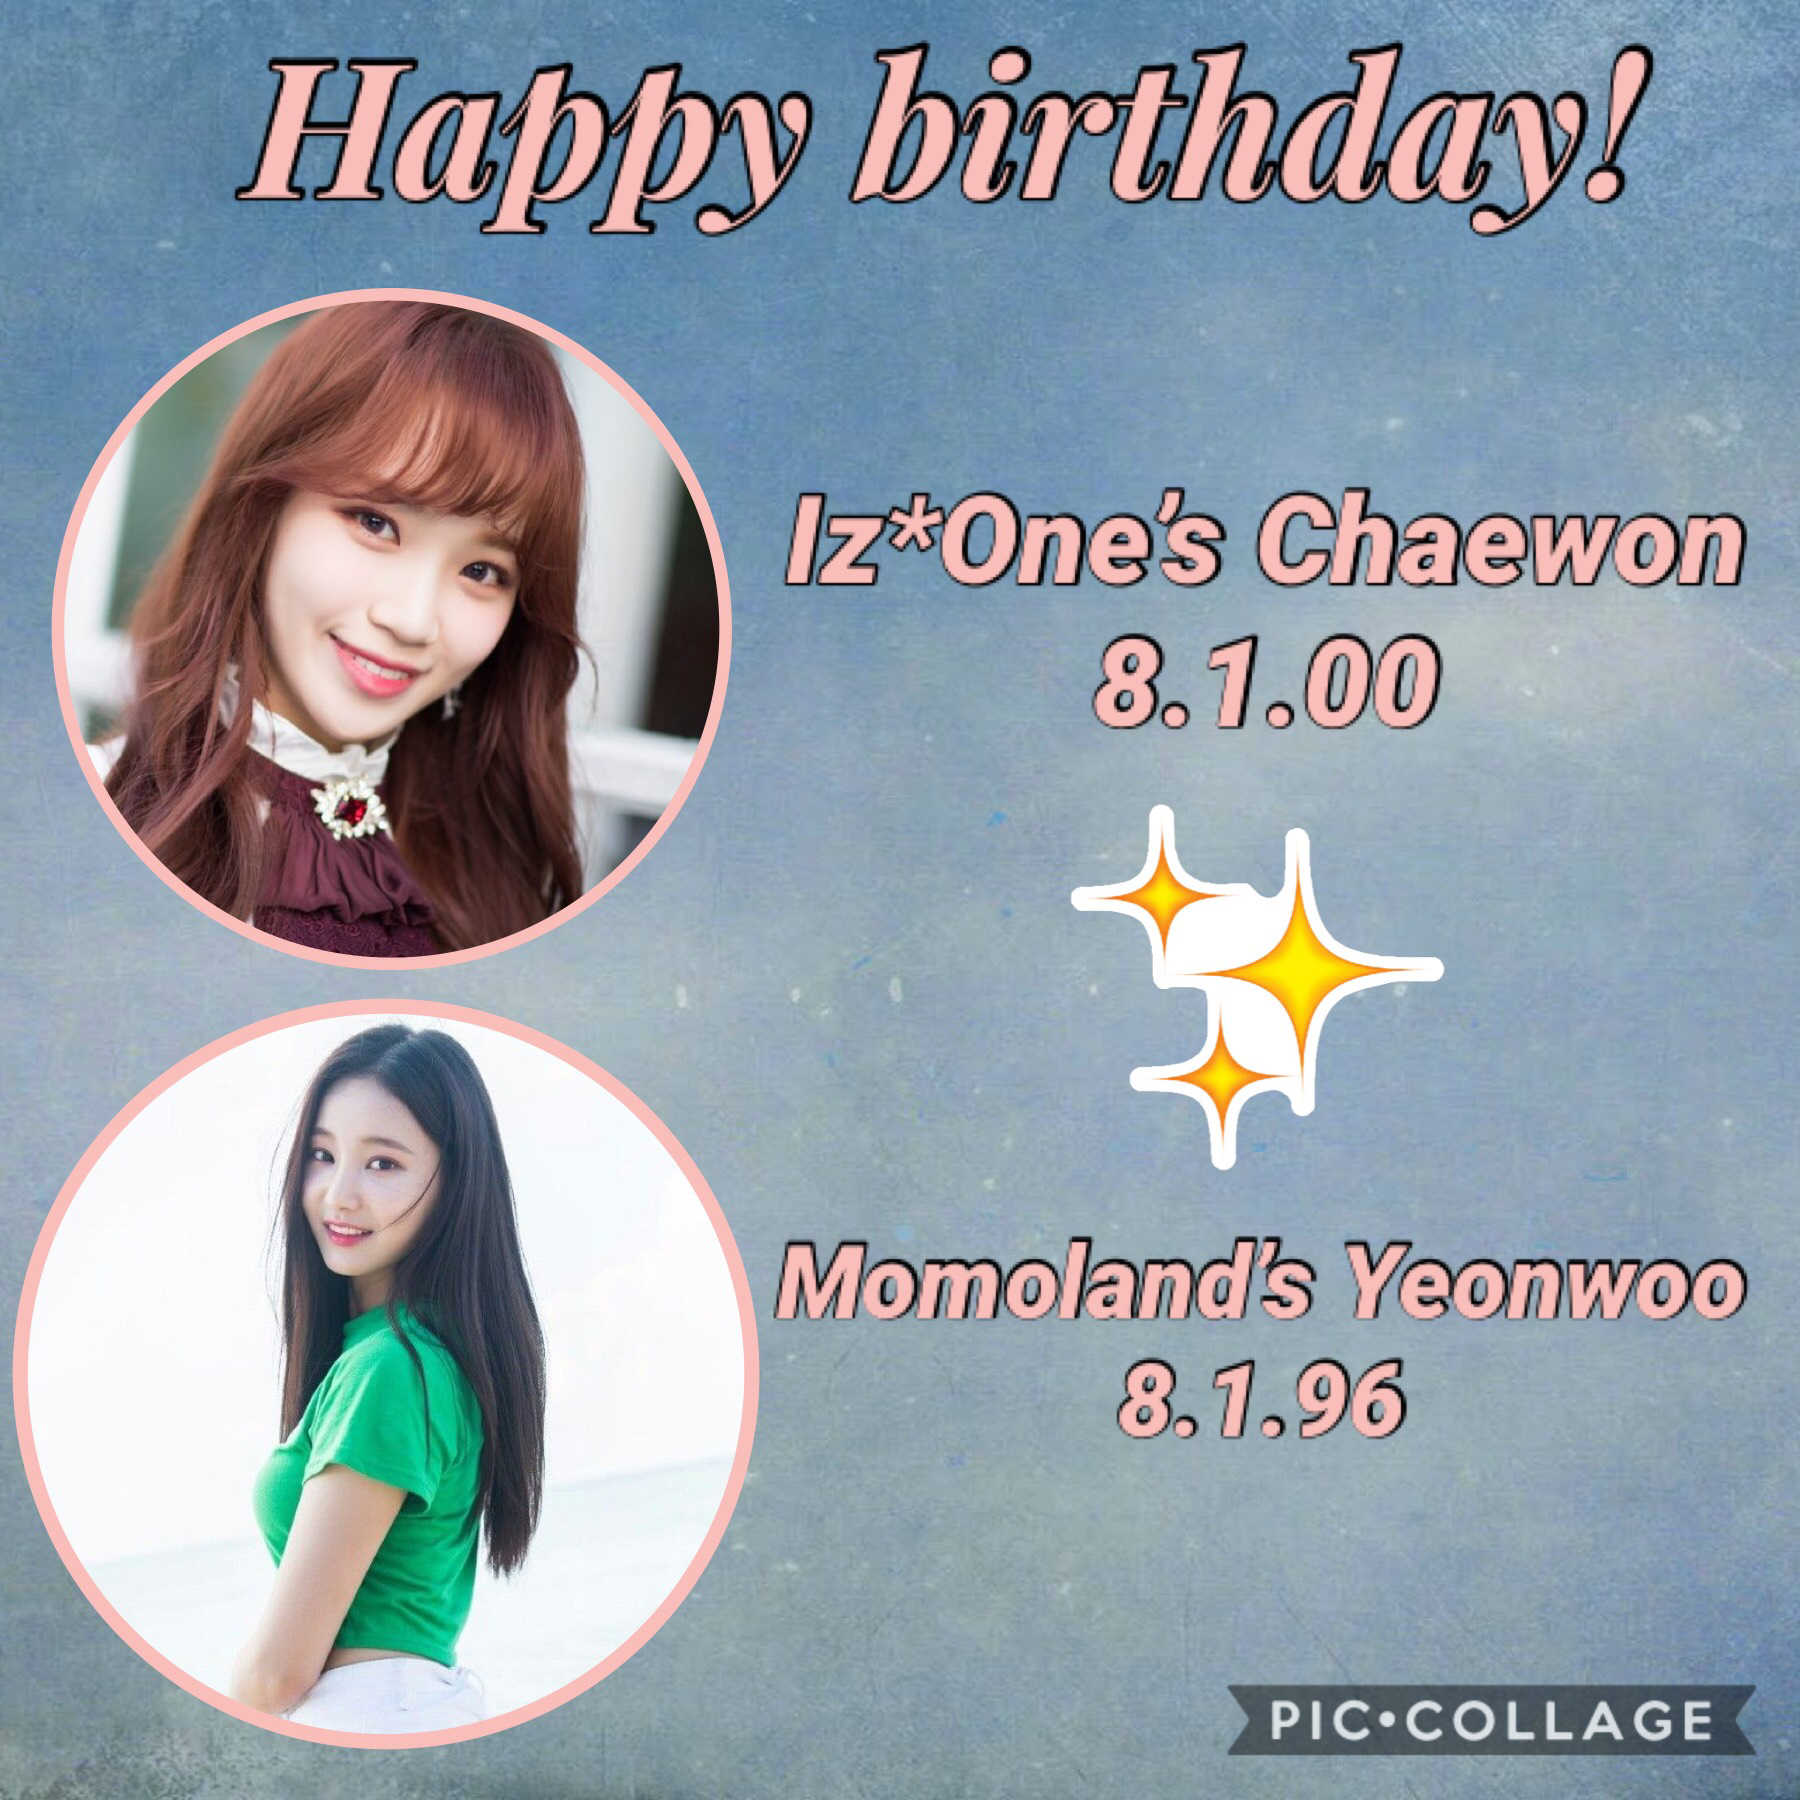 •🎉🎈•
Happy birthday girls!!❤️❤️ I love Chaewon’s beautiful vocals and Yeonwoo’s charisma😊
🎉🎉🎉
Other birthdays today:
•Tiffany Young
🍃🌴🍃🌴🍃🌴🍃🌴🍃